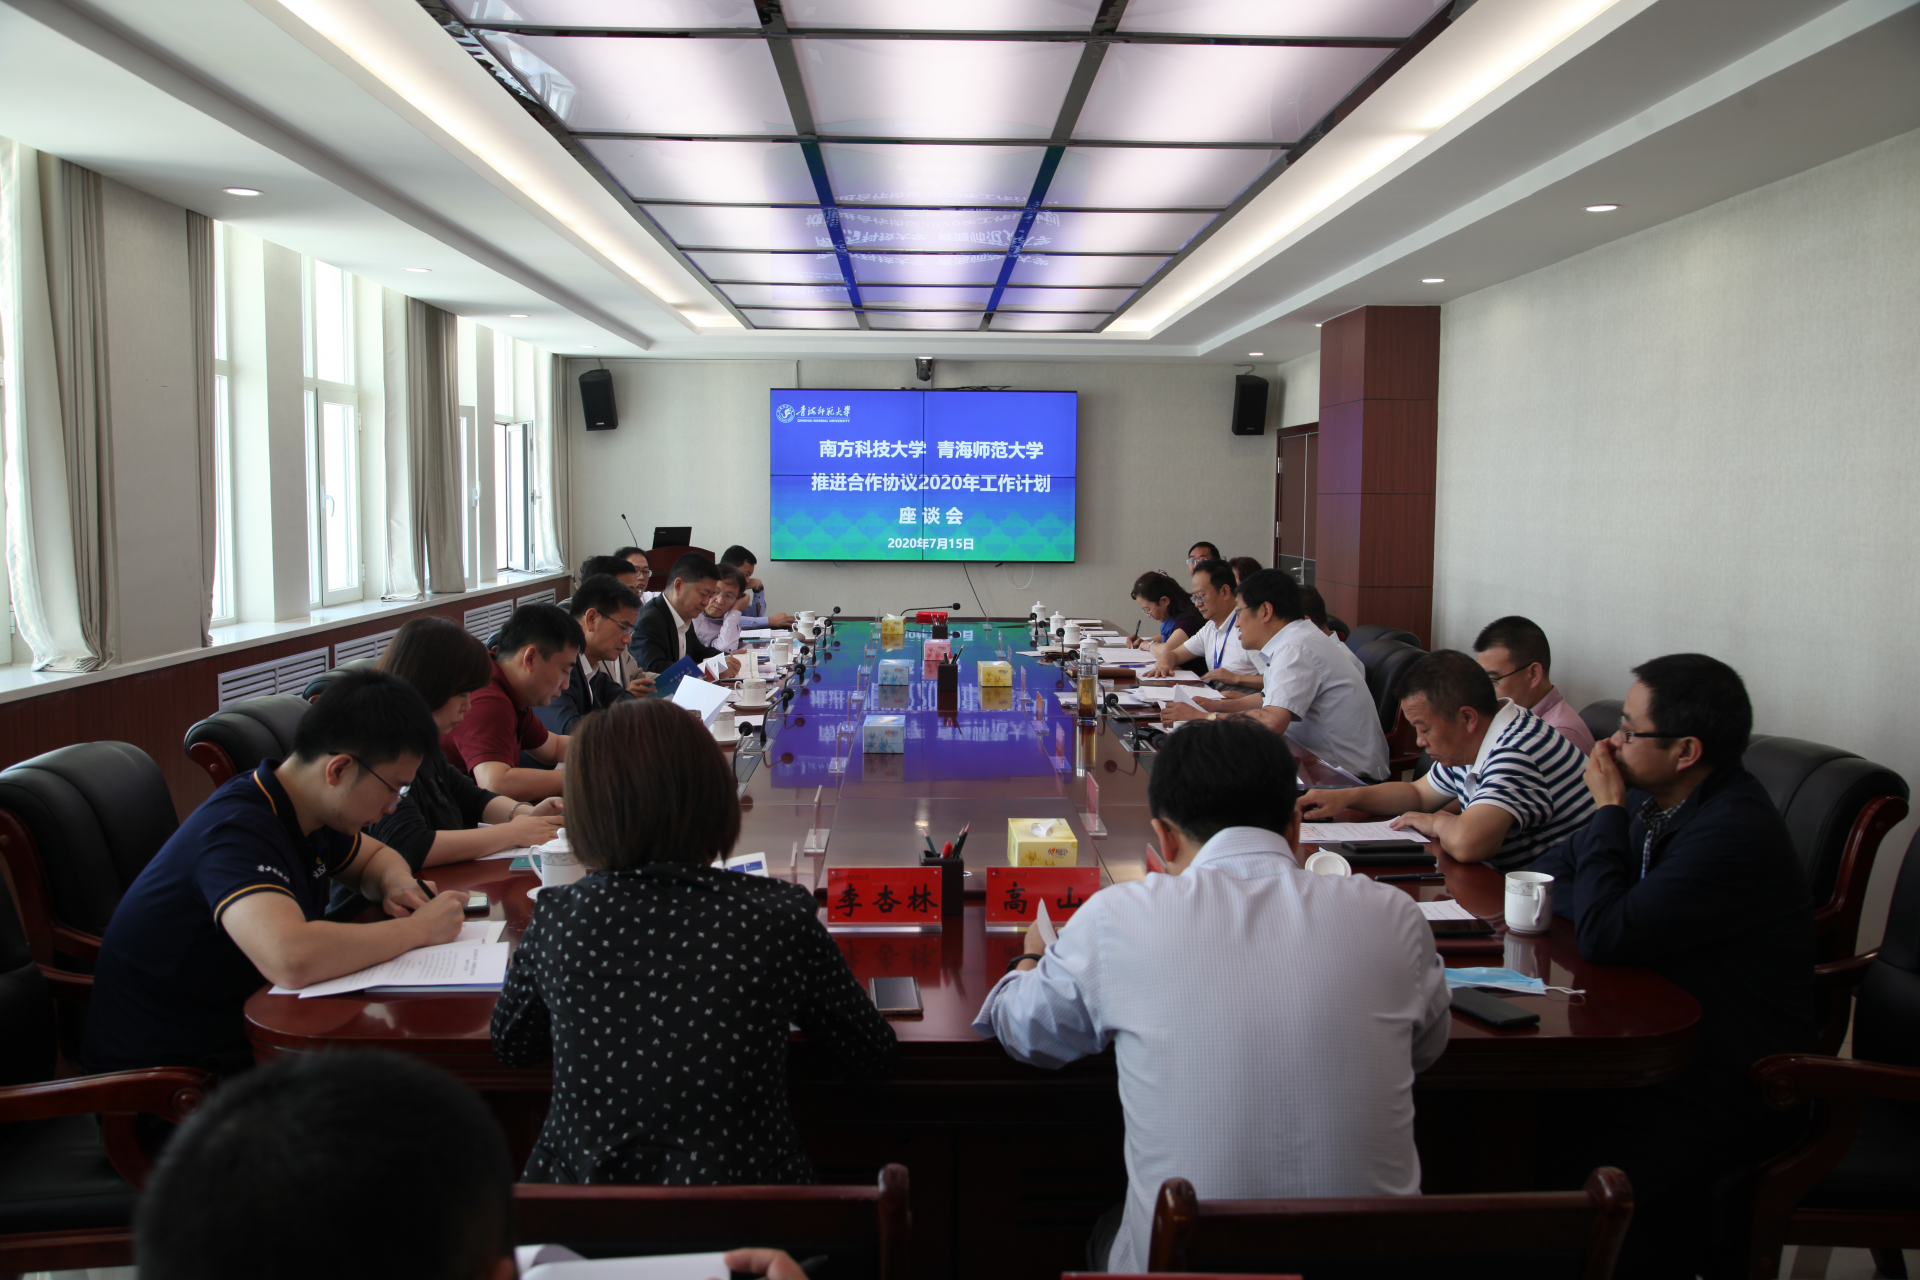 SUSTech collaborates with Qinghai Normal University